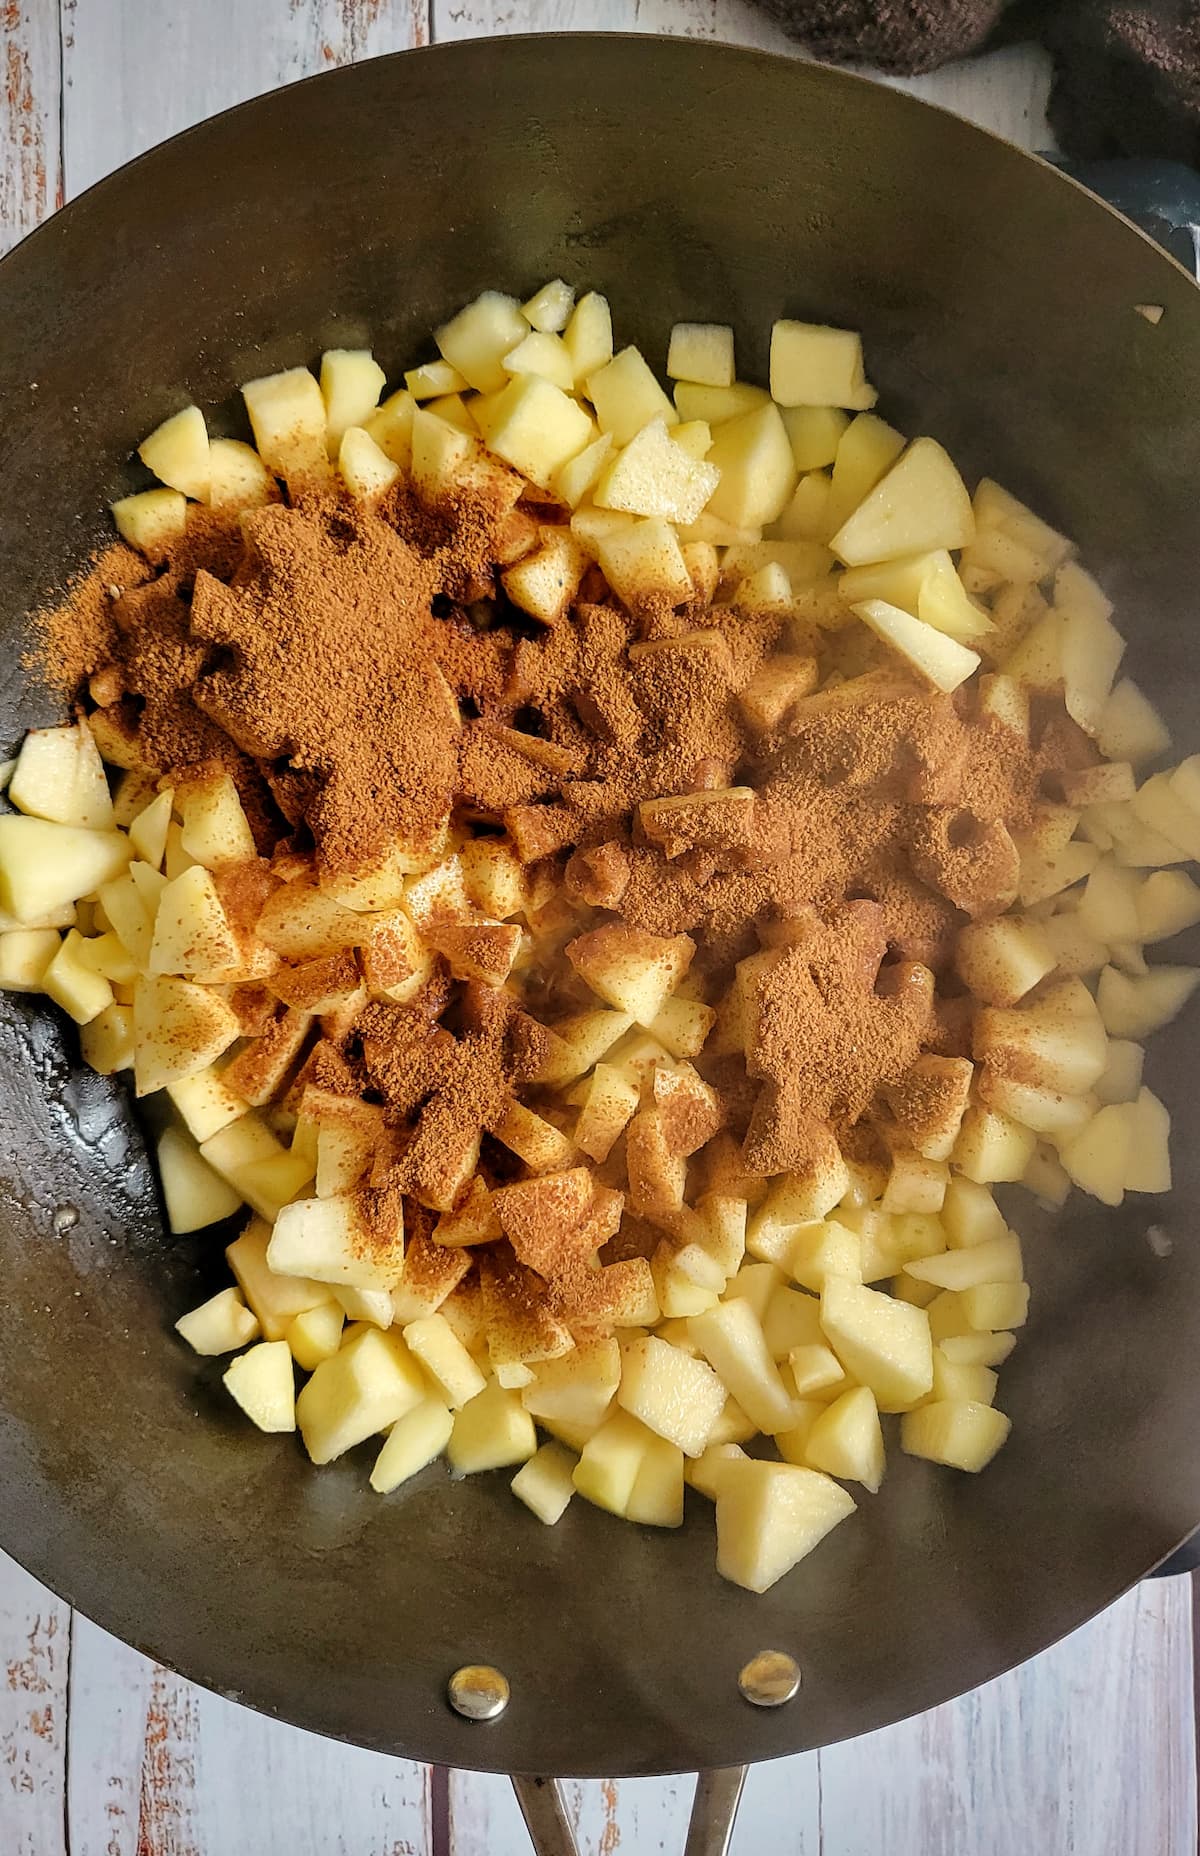 diced apples with spices in a skillet